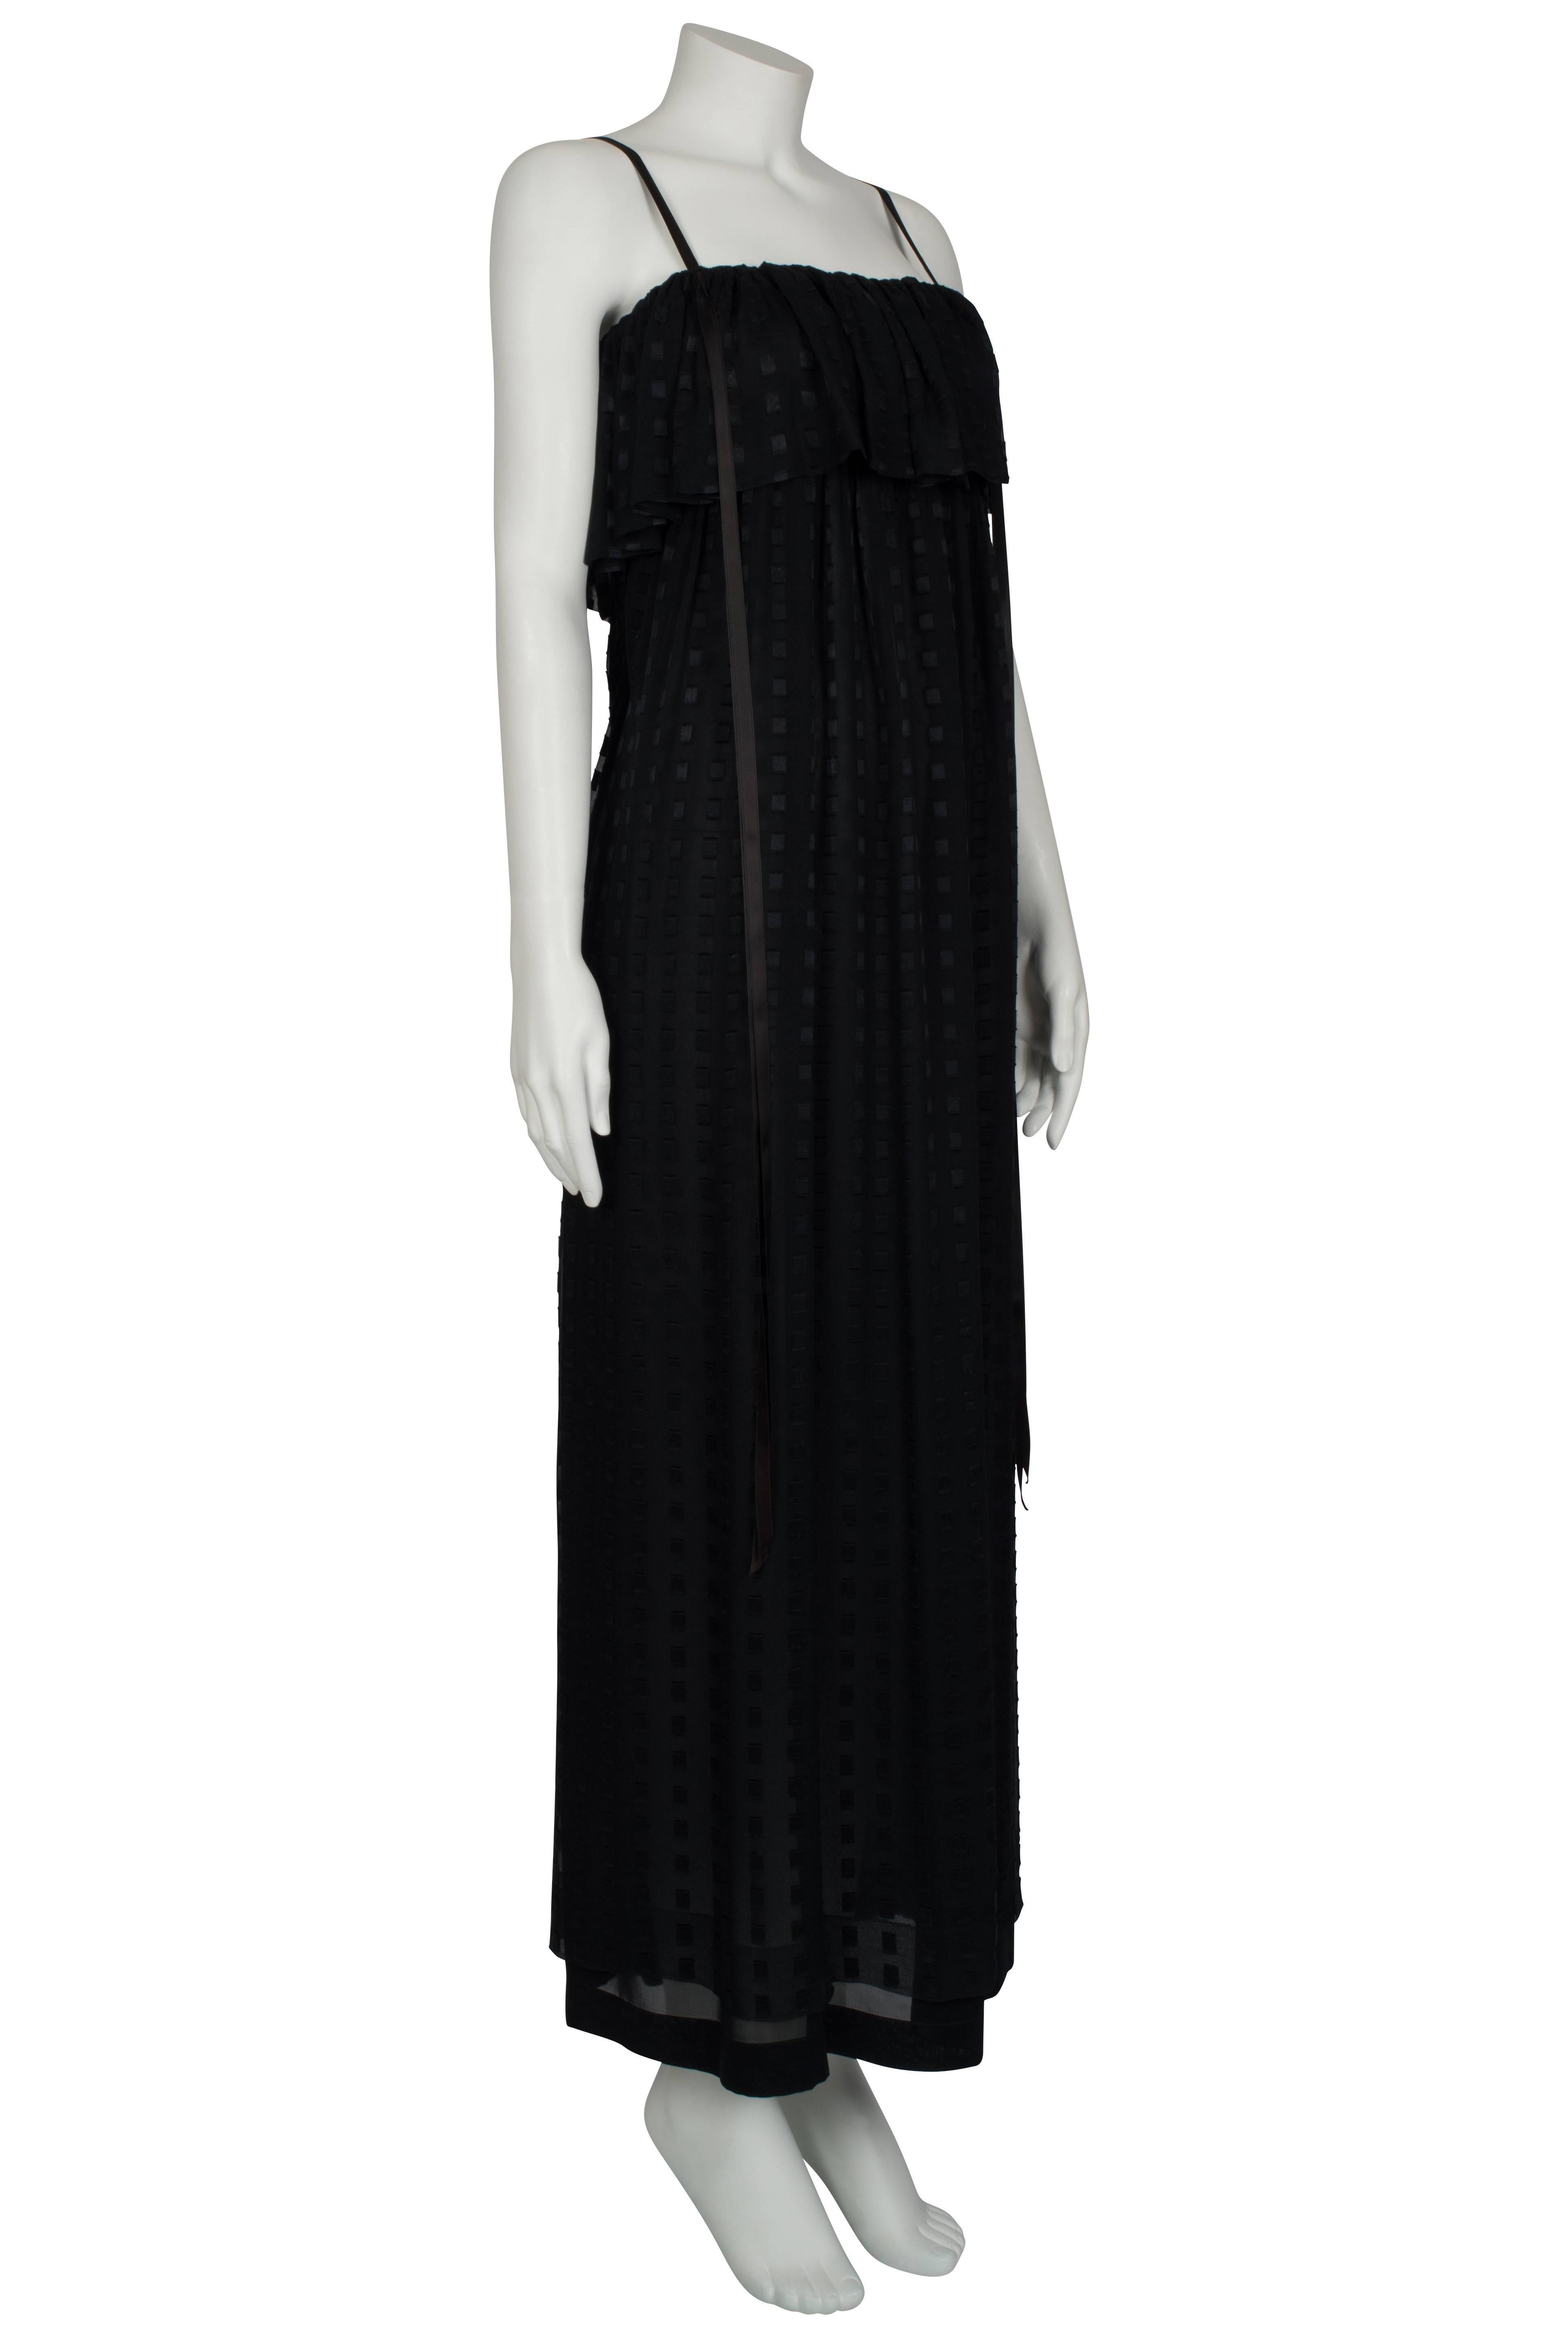 Christian Dior Black Embossed Square Chiffon Gown ca 1980 In Excellent Condition For Sale In London, GB